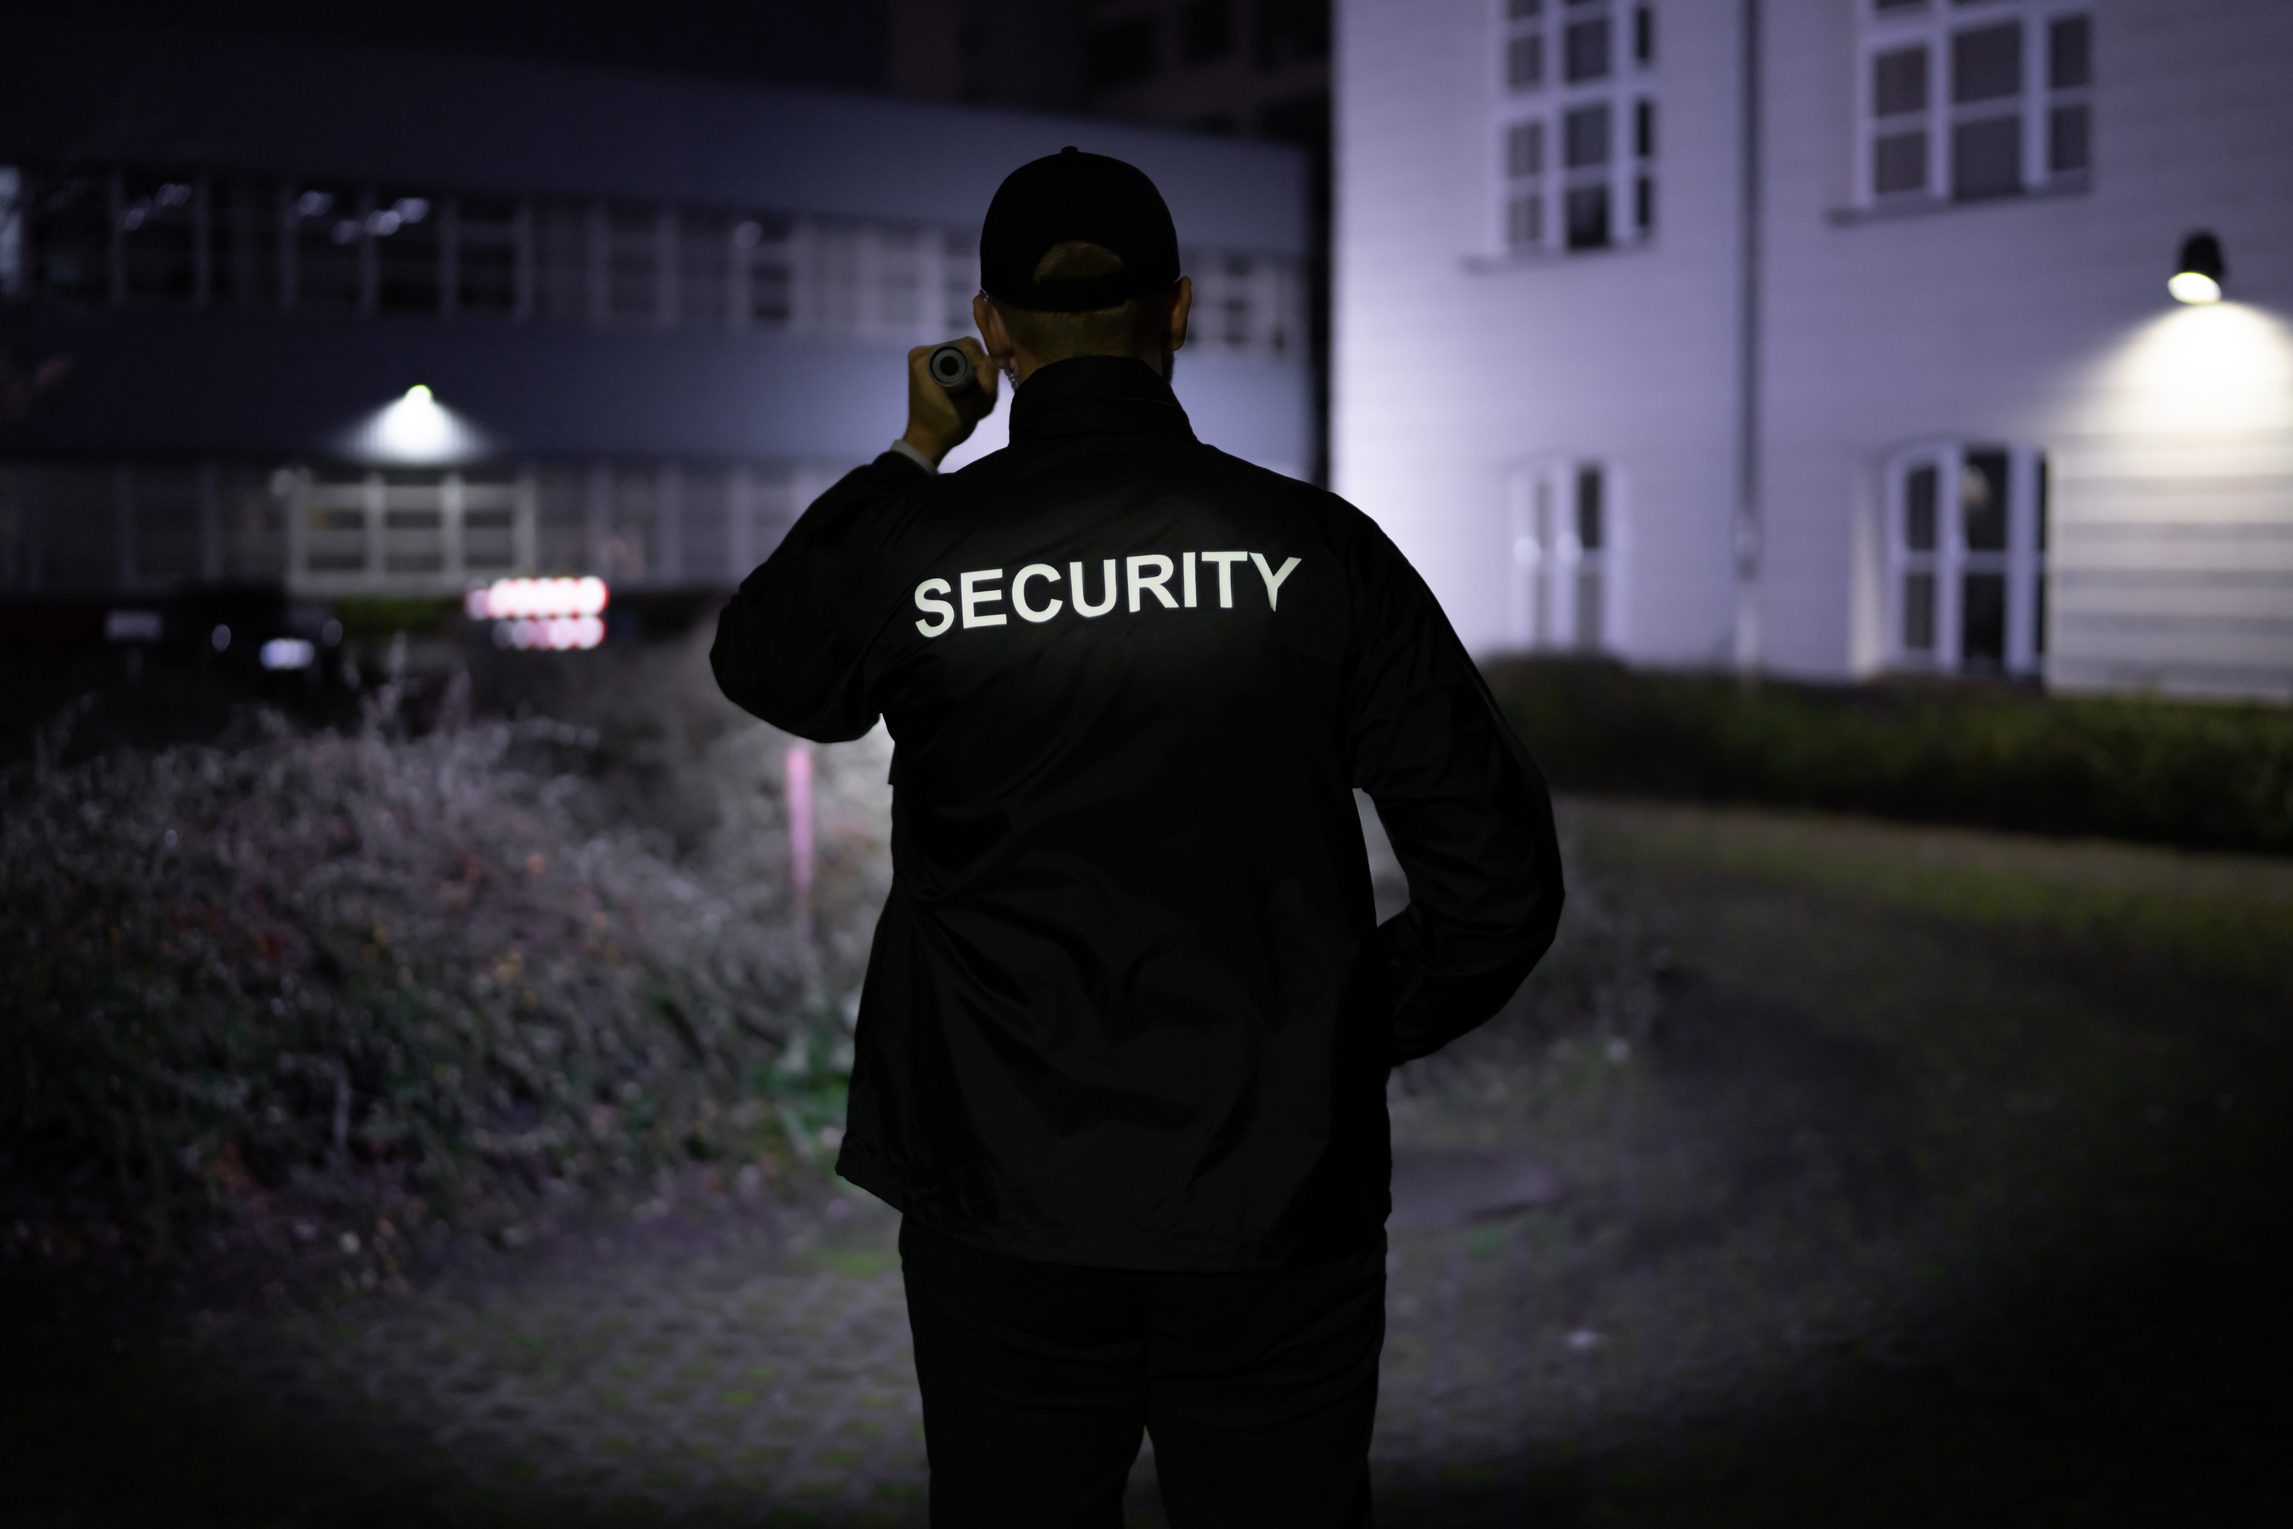 A security worker in a black jacket patrolling a commercial building at night